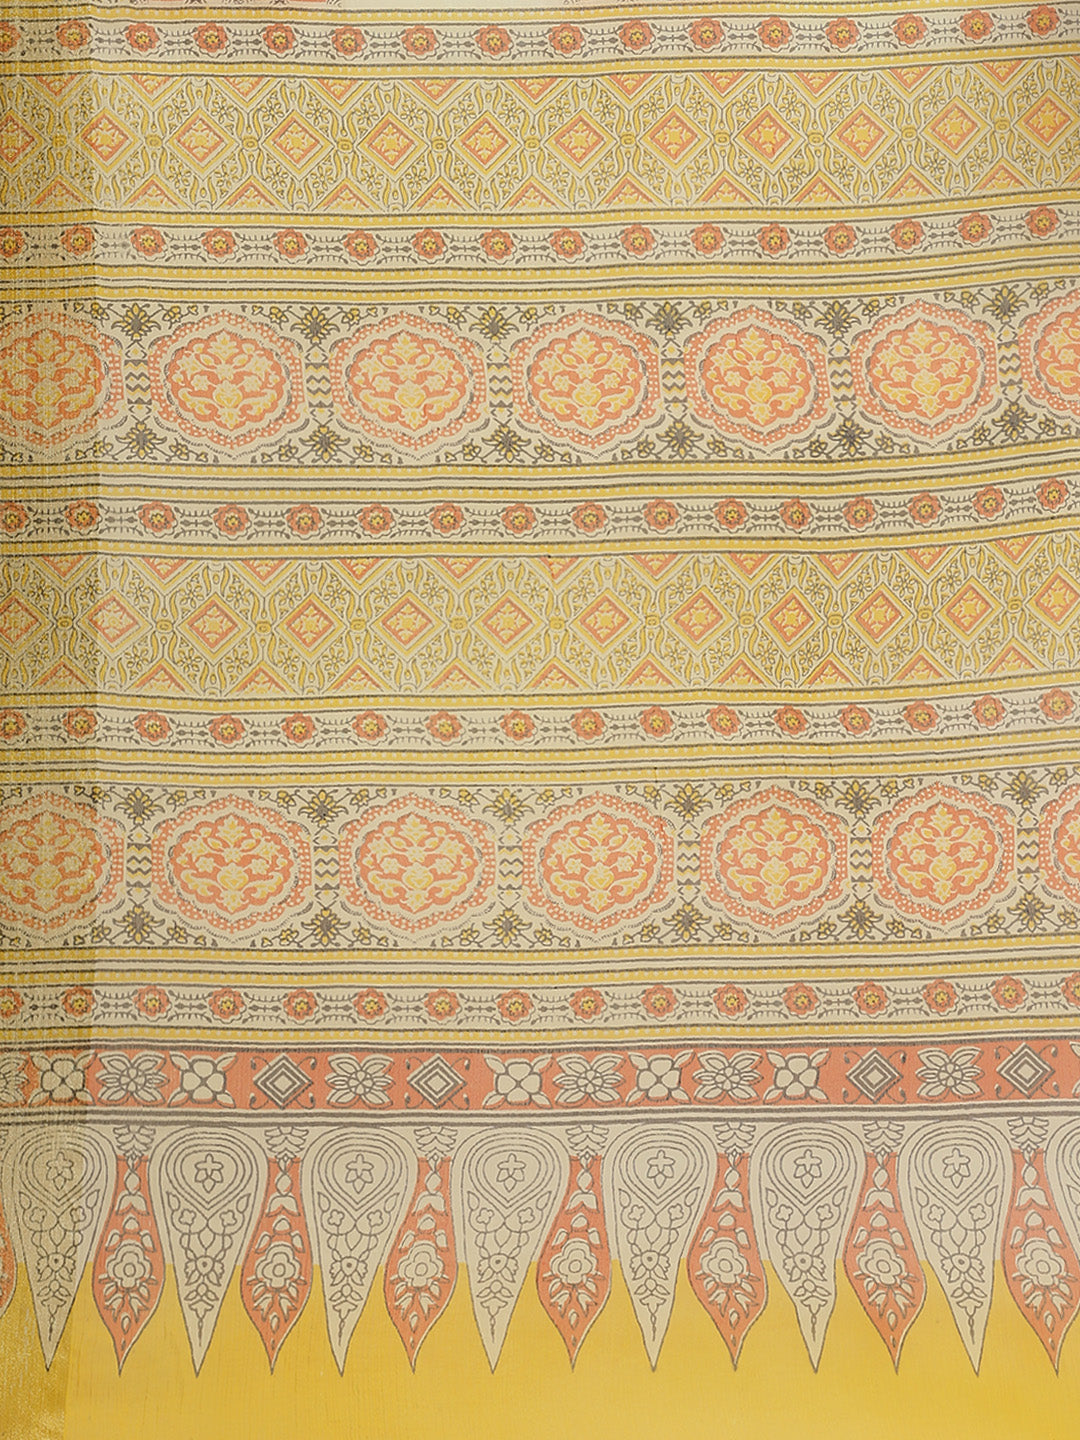 Yellow and Orange, Kalakari India Chiffon Handblock Printed Saree and Blouse RCBGSA0004-Saree-Kalakari India-RCBGSA0004-Chiffon, Geographical Indication, Hand Block, Hand Crafted, Heritage Prints, Natural Dyes, Red, Sarees, Sustainable Fabrics, Woven, Yellow-[Linen,Ethnic,wear,Fashionista,Handloom,Handicraft,Indigo,blockprint,block,print,Cotton,Chanderi,Blue, latest,classy,party,bollywood,trendy,summer,style,traditional,formal,elegant,unique,style,hand,block,print, dabu,booti,gift,present,glamor